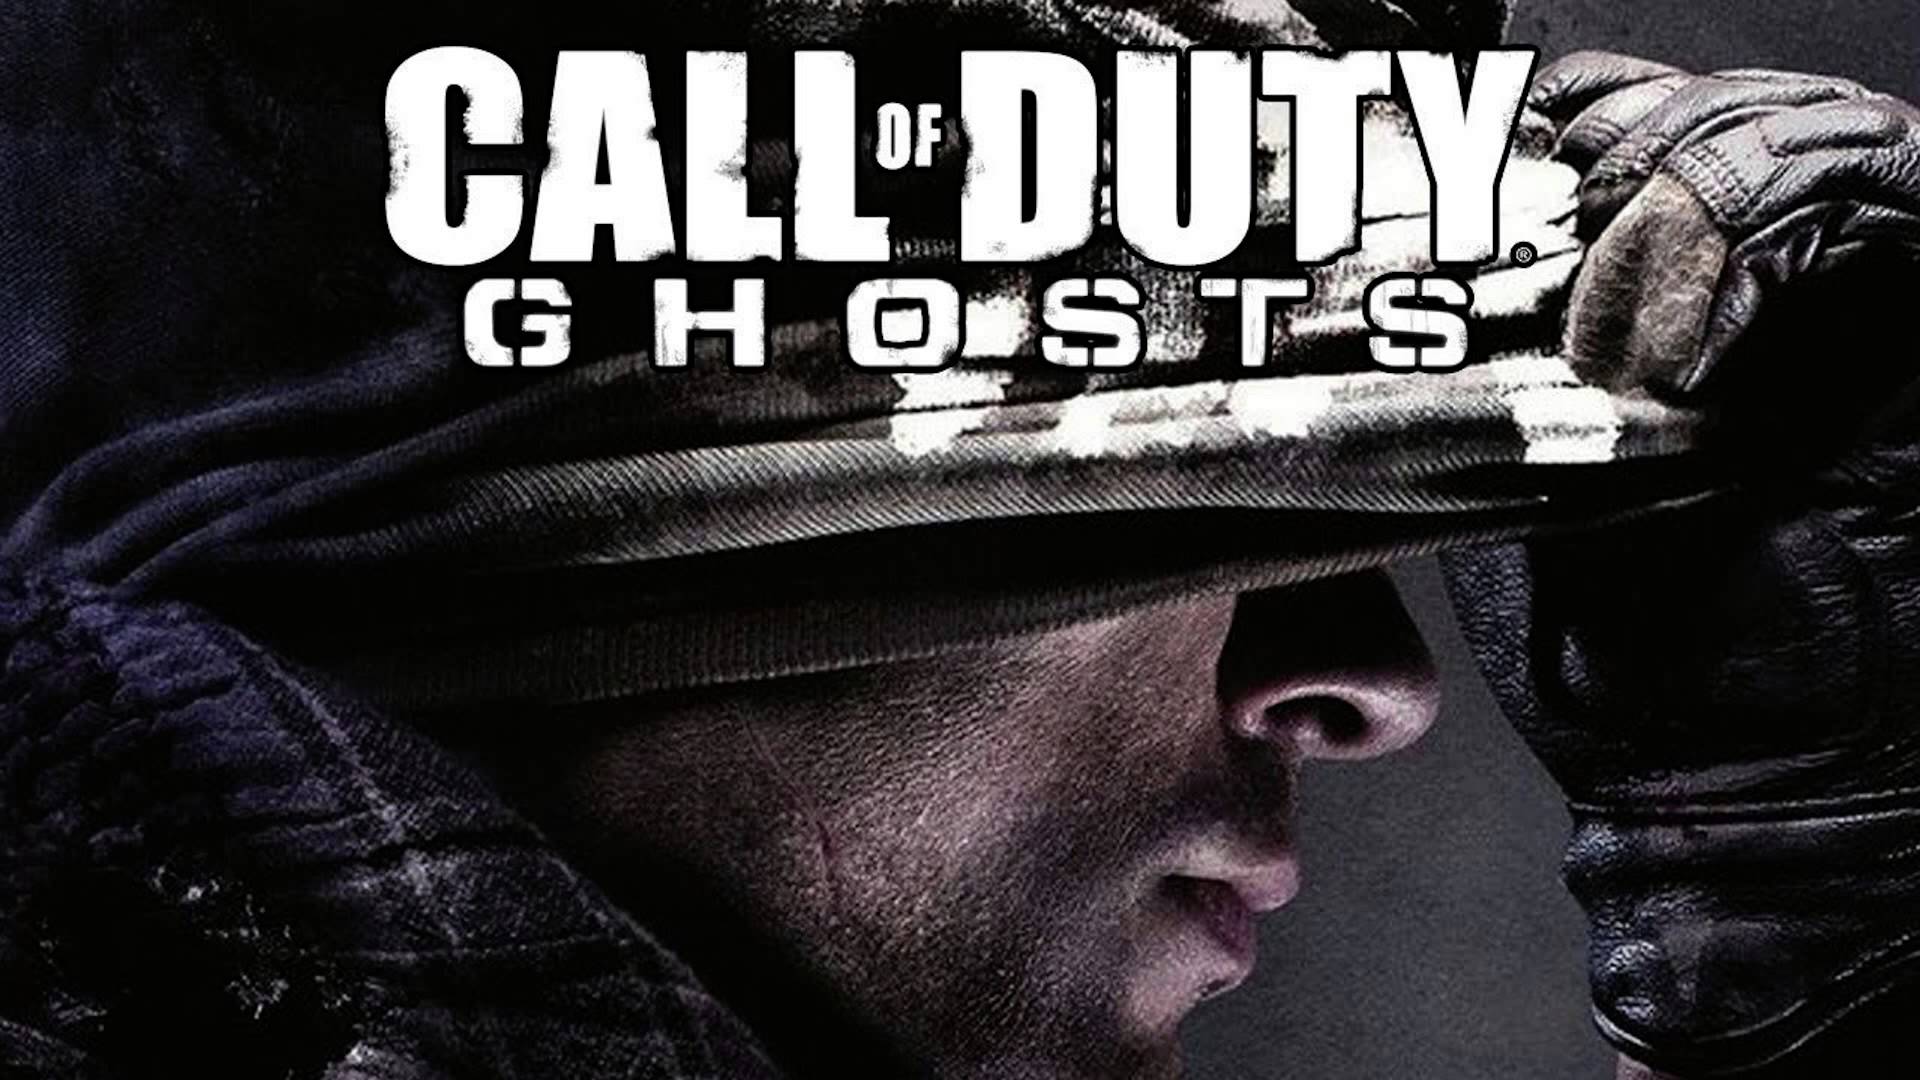 Download Call of Duty Ghost Wallpaper Wallpapers 1920x1080